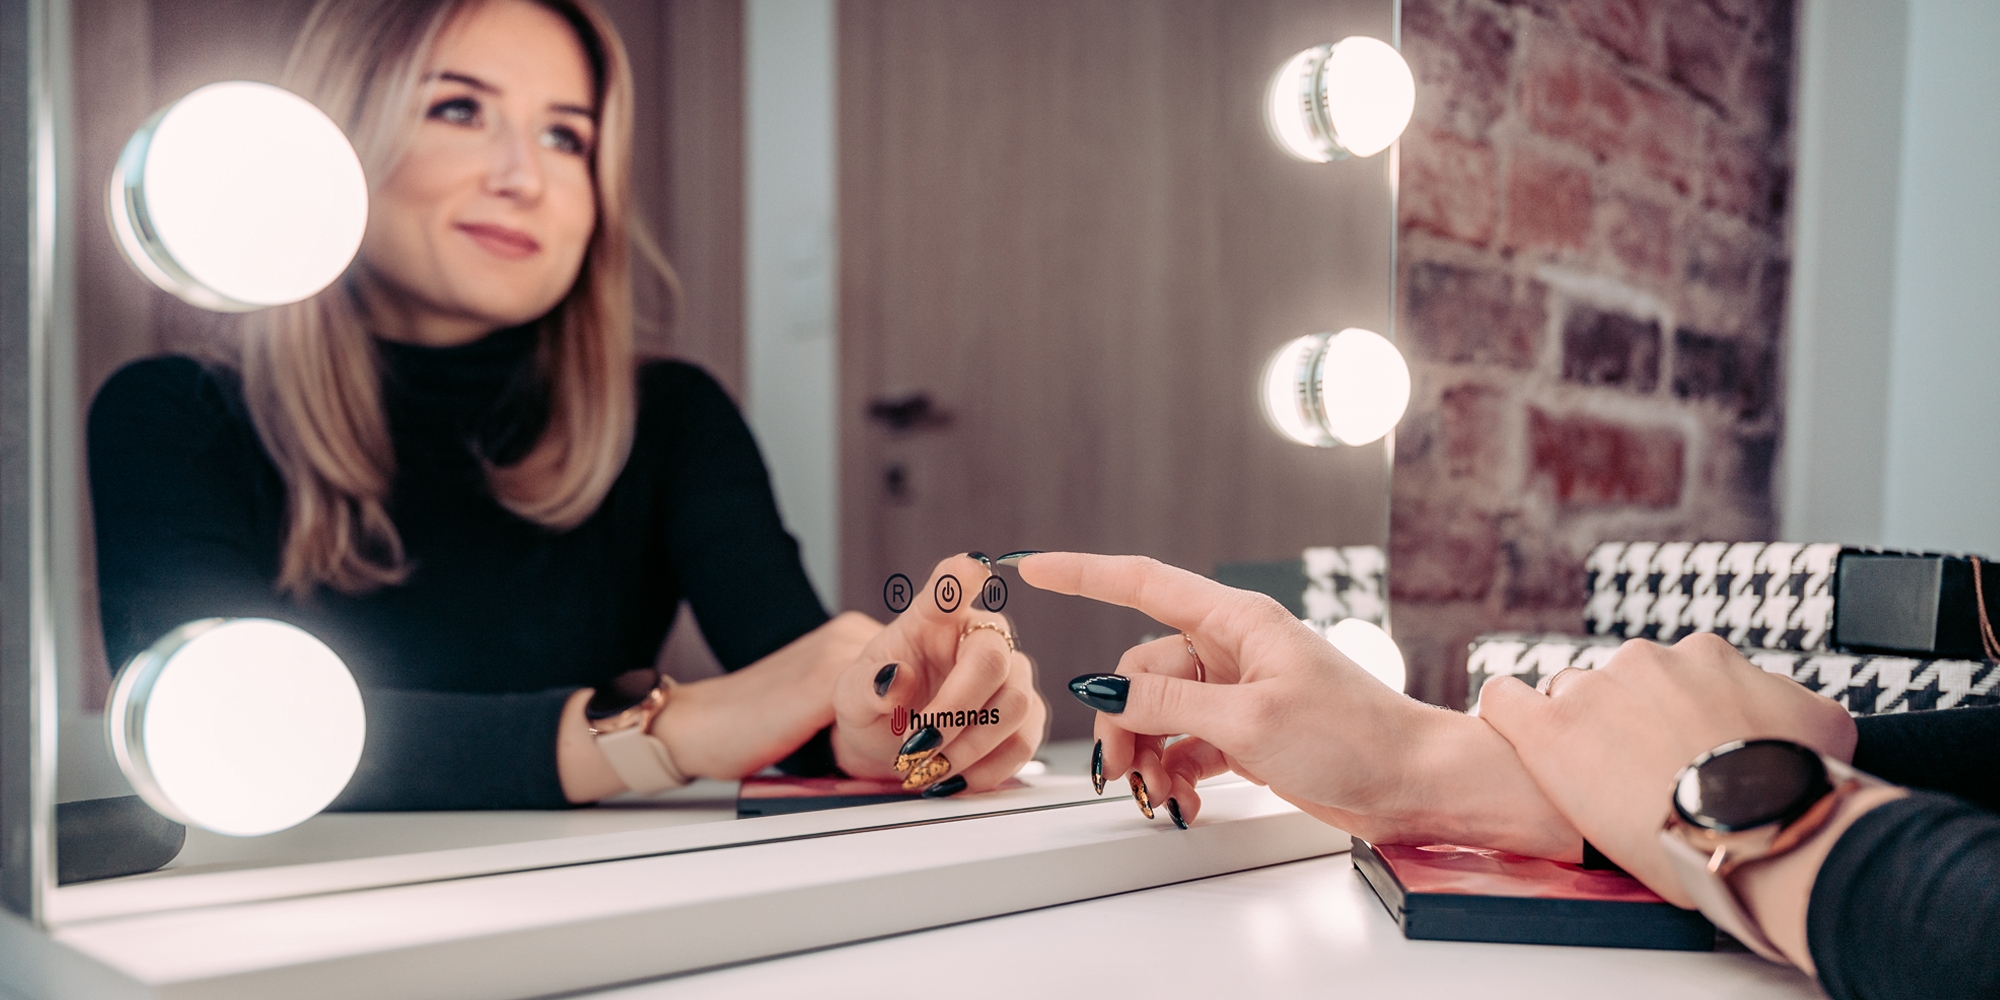 Young woman does her makeup in front of LED lighted mirror